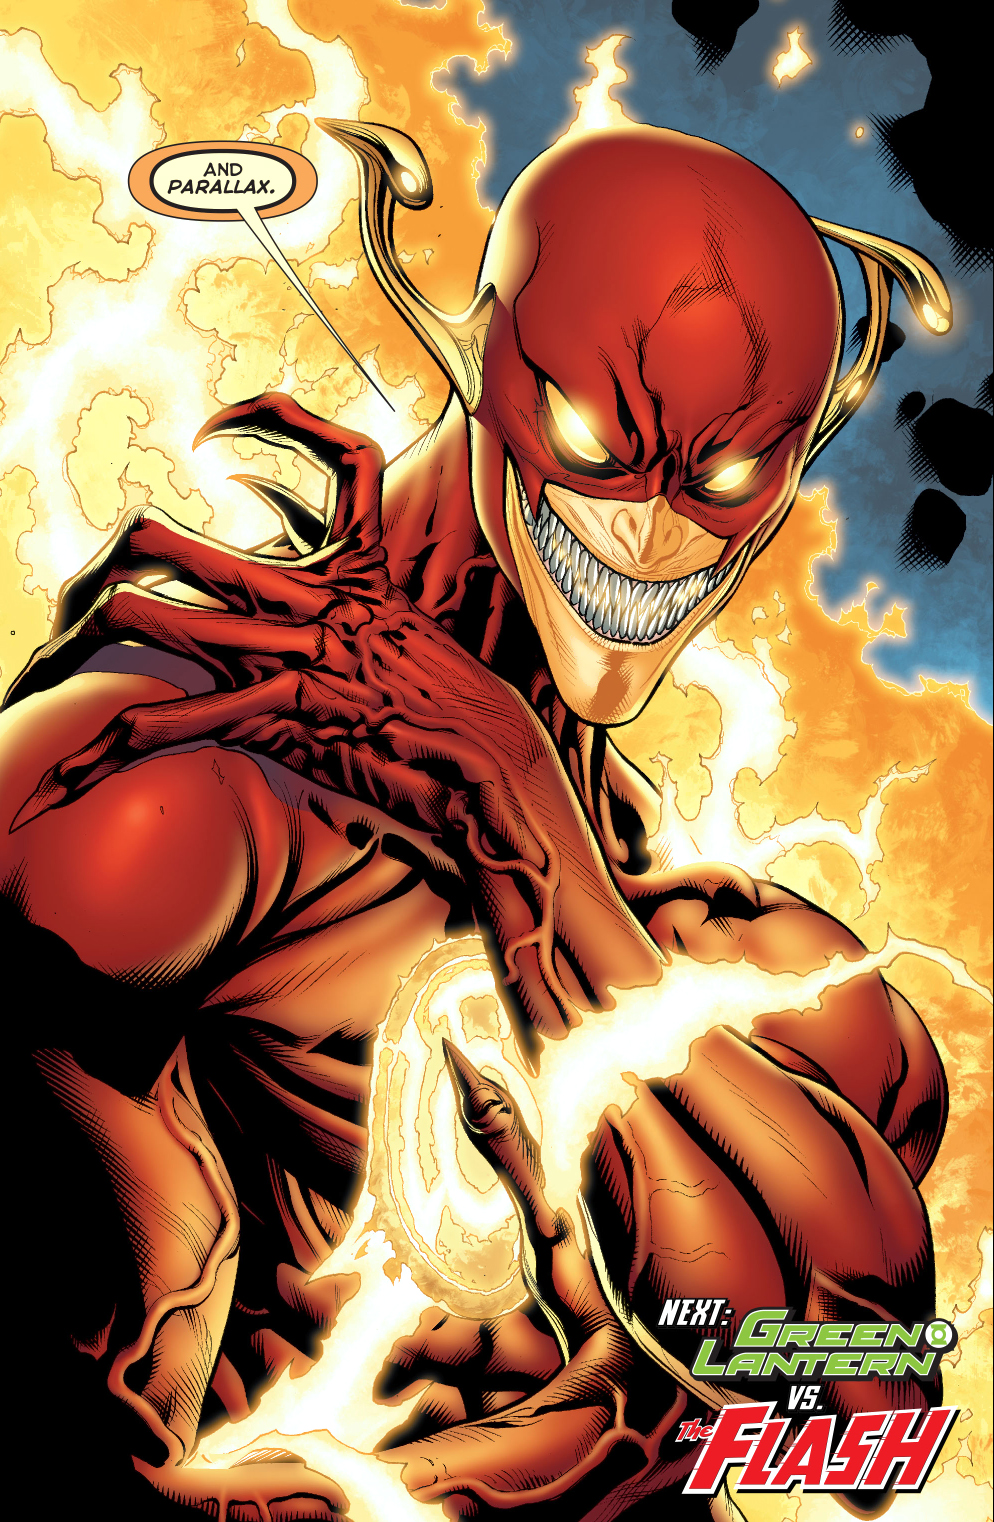 The Flash Possessed By Parallax – Comicnewbies